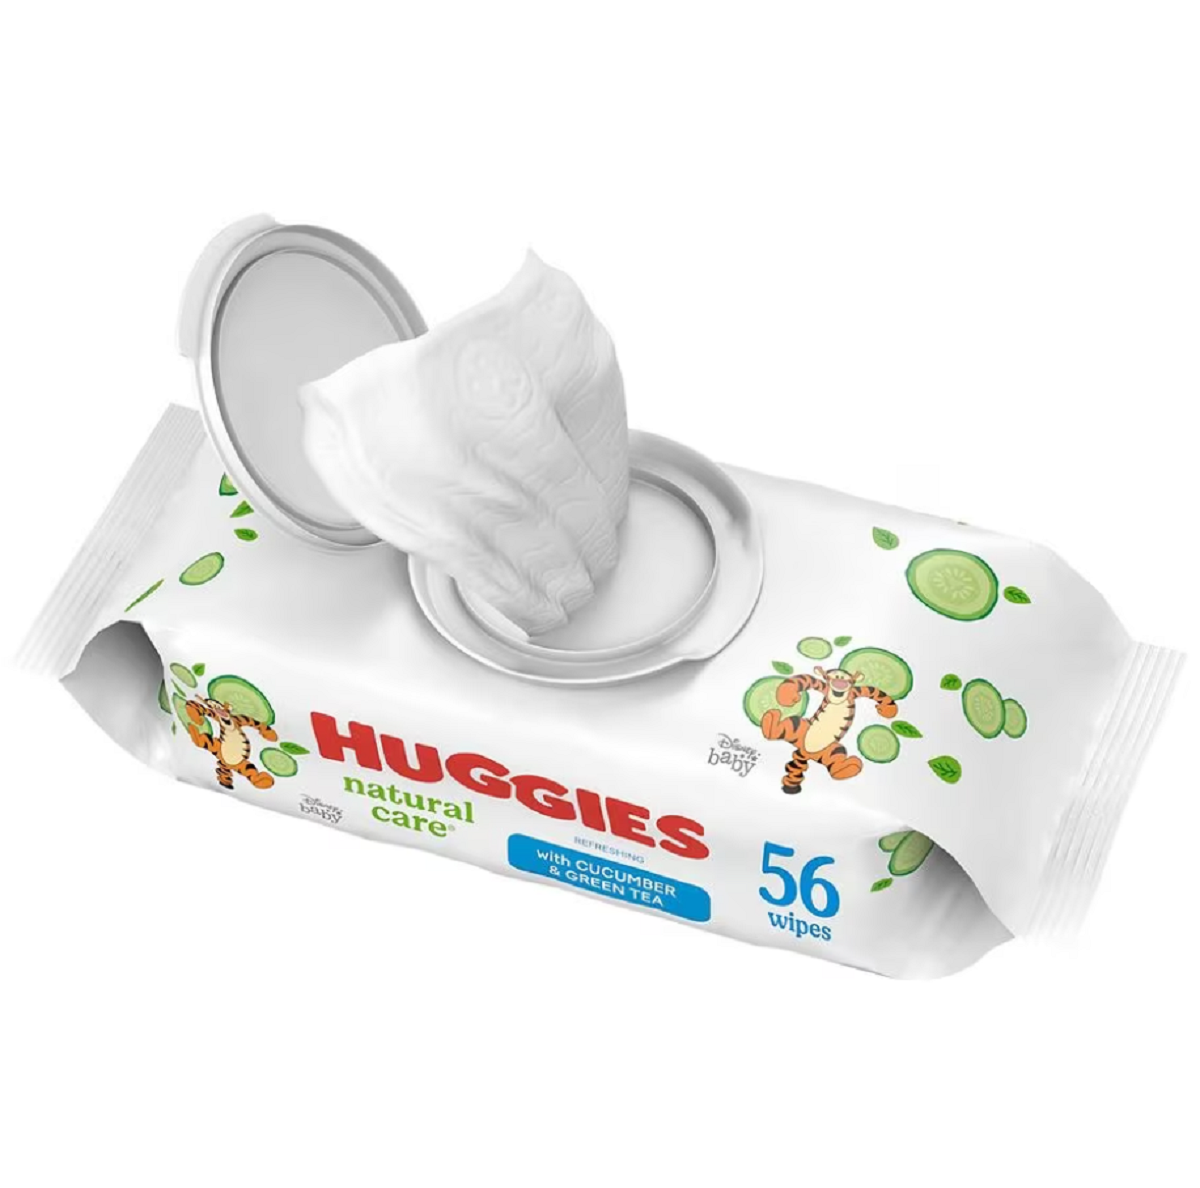 $0.25 Off (1) Huggies Natural Care Baby Wipes Coupon